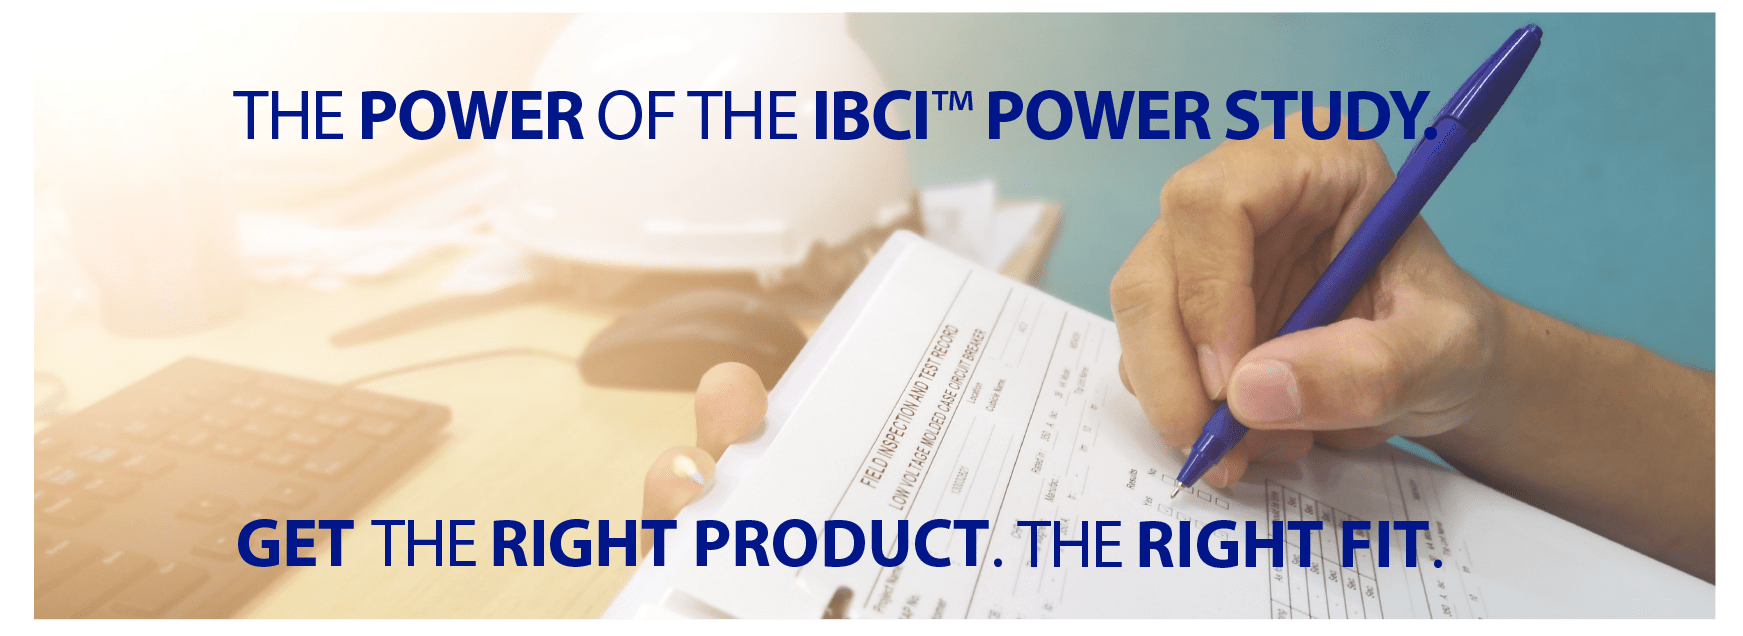 Take Control of Your Power Costs. The Power Of the IBCI Power Study. Get the Right Product The Right Fit